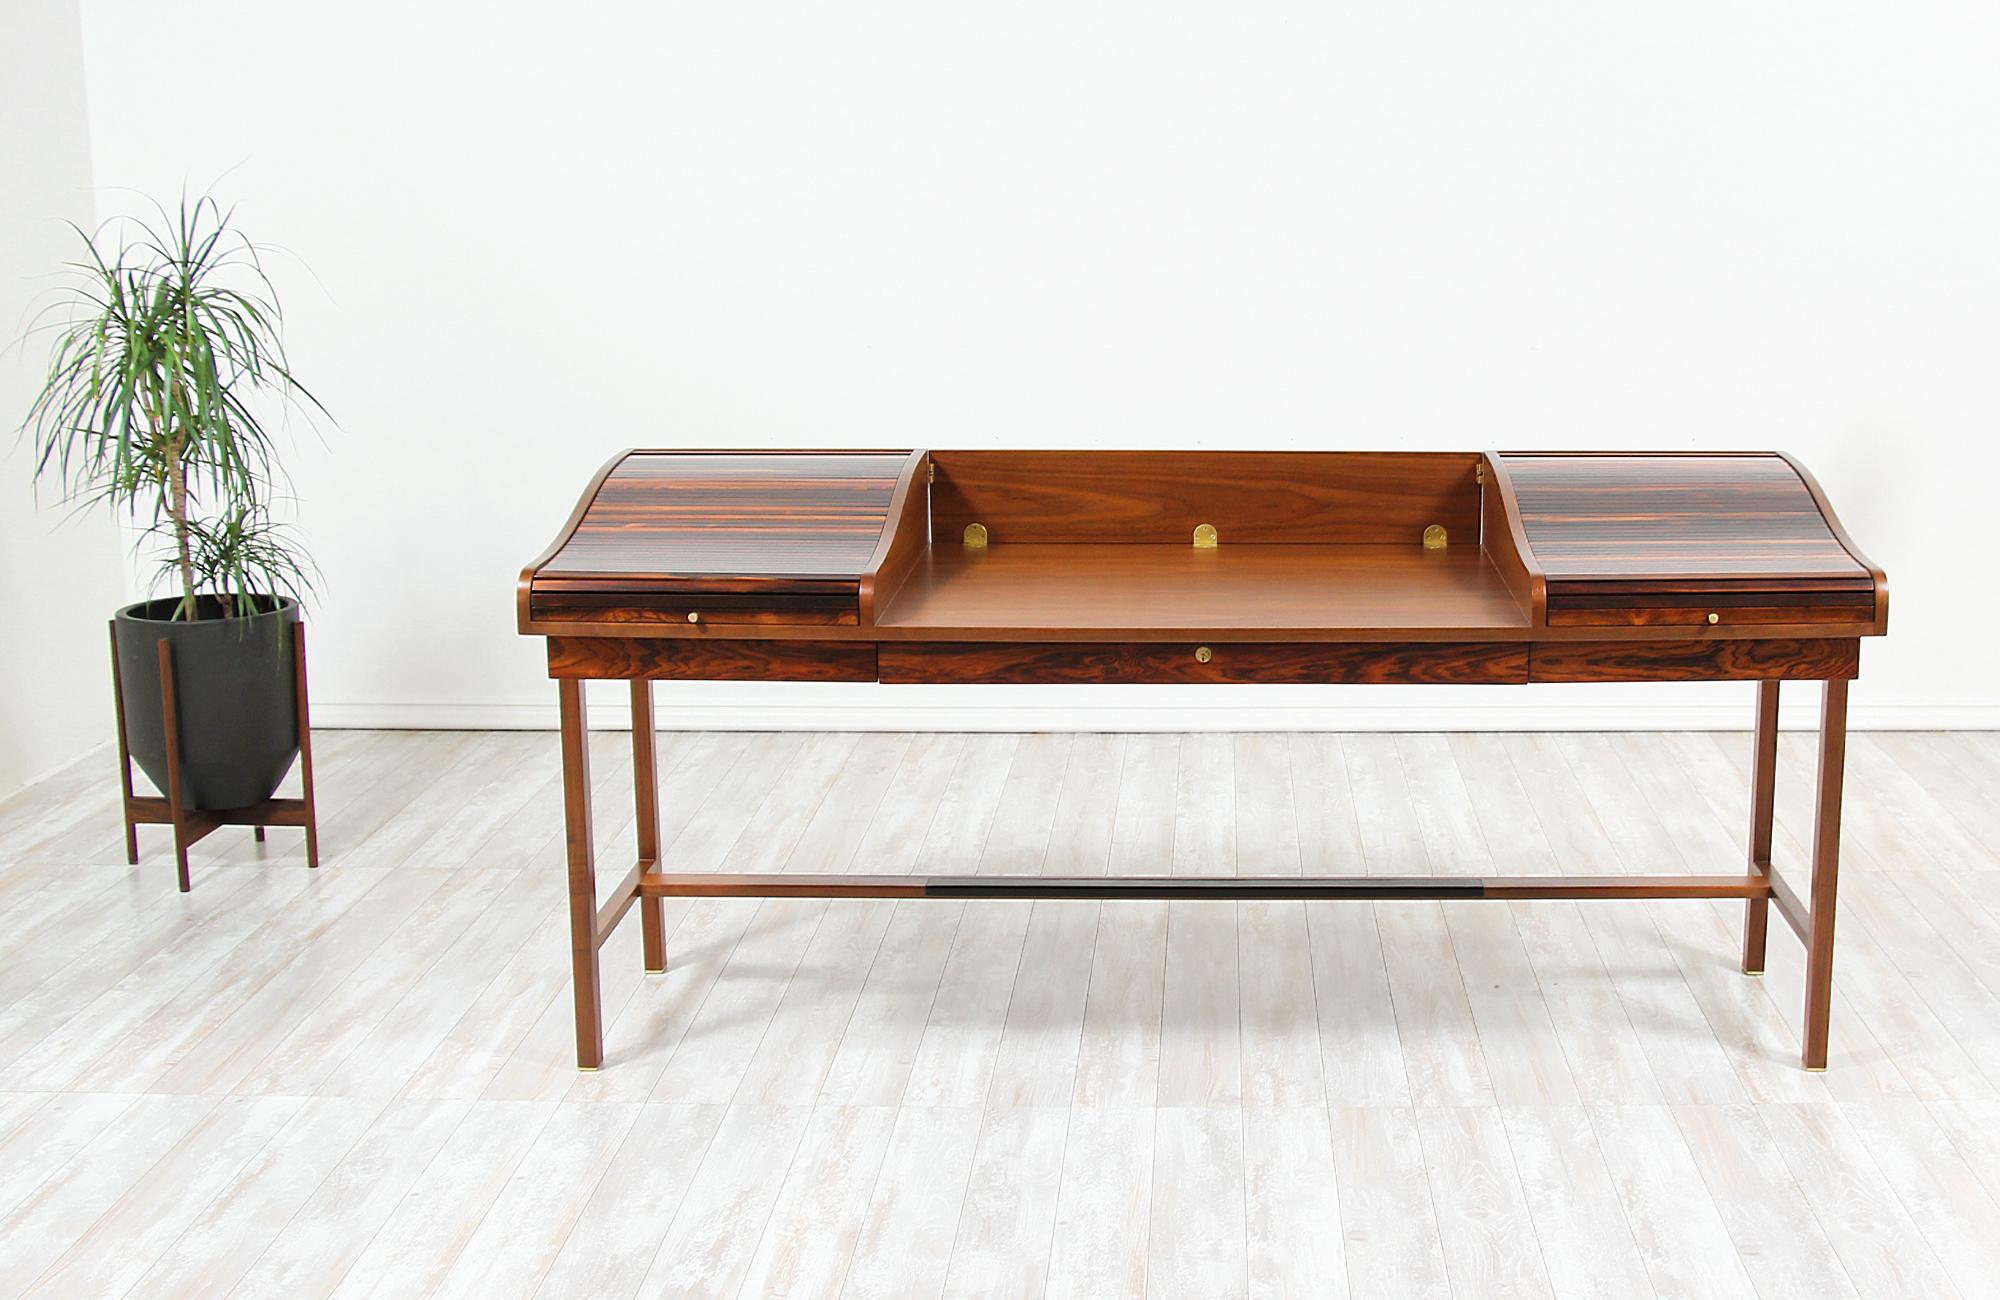 Elegant desk designed by Edward J. Wormley for Dunbar in the United States in 1957. This fabulous model #452 modern executive desk features a solid walnut wood frame and writing surface with a hinged panel at the back that drops, allowing it to